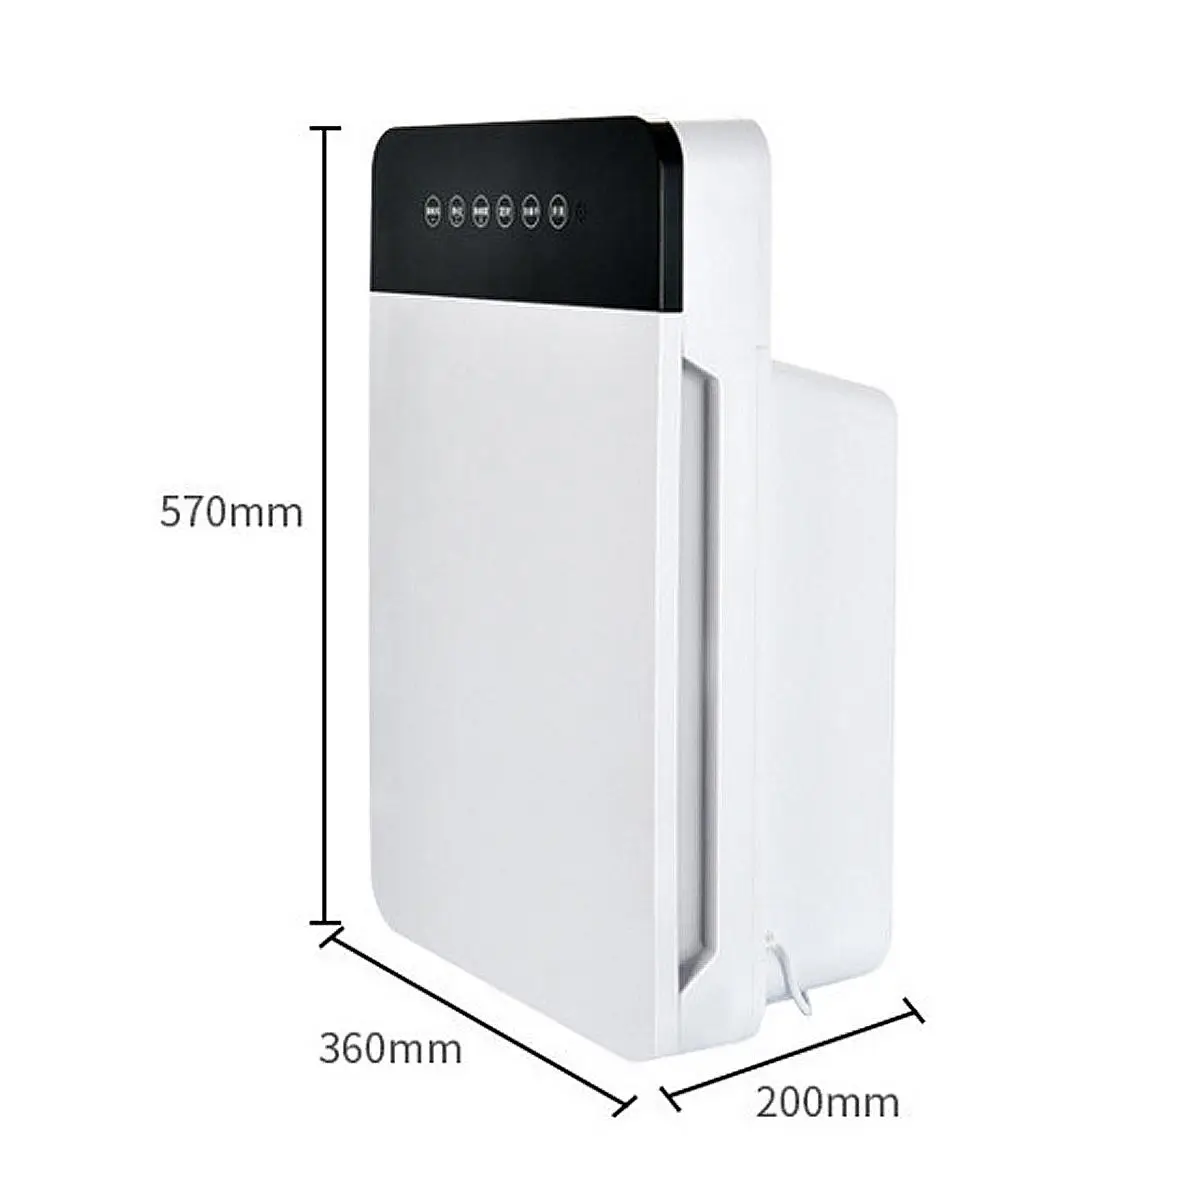 

Air Purifier Large scale Negative Ionizer LED Quiet Activated Carbon Air Filter for Home Office Remove Formaldehyde Smoke